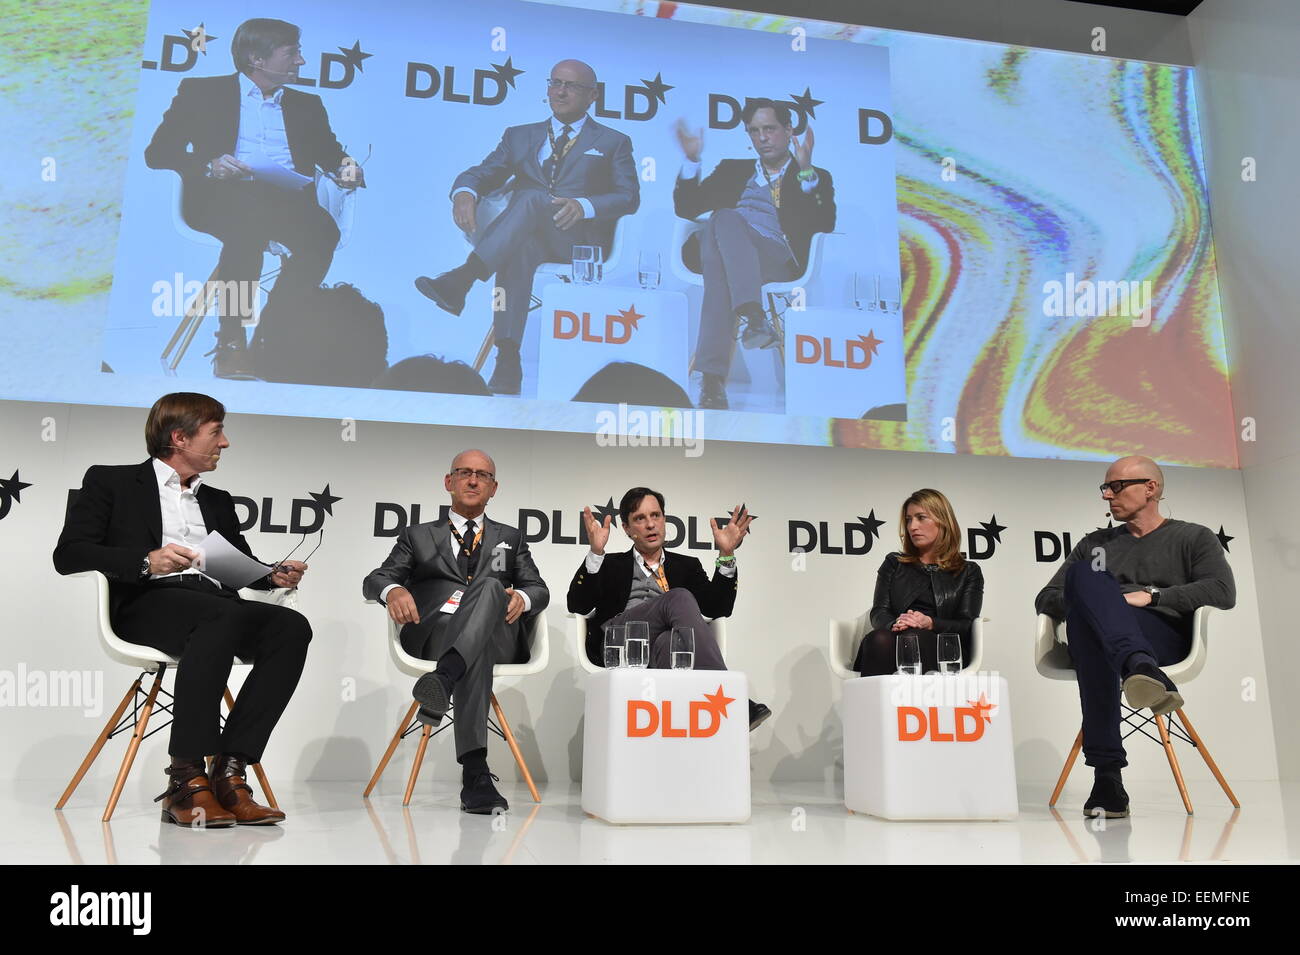 MUNICH/GERMANY - JANUARY 19: Thomas Tochtermann (WEF), Andrea Panconesi (Luisa Via Roma), Gregor Vogelsang (C3), Tracy Yaverbaun (Instagram), and Scott Galloway (L2 Thinktank) sit together on a panel discussion during the DLD15 (Digital-Life-Design) Conference at the HVB Forum on January 19, 2015 in Munich, Germany. DLD is a global network of innovation, digitization, science and culture, which connects business, creative and social leaders, opinion formers and influencers for crossover conversation and inspiration.(Photo: picture alliance/Kai-Uwe Wärner)/picture alliance Stock Photo